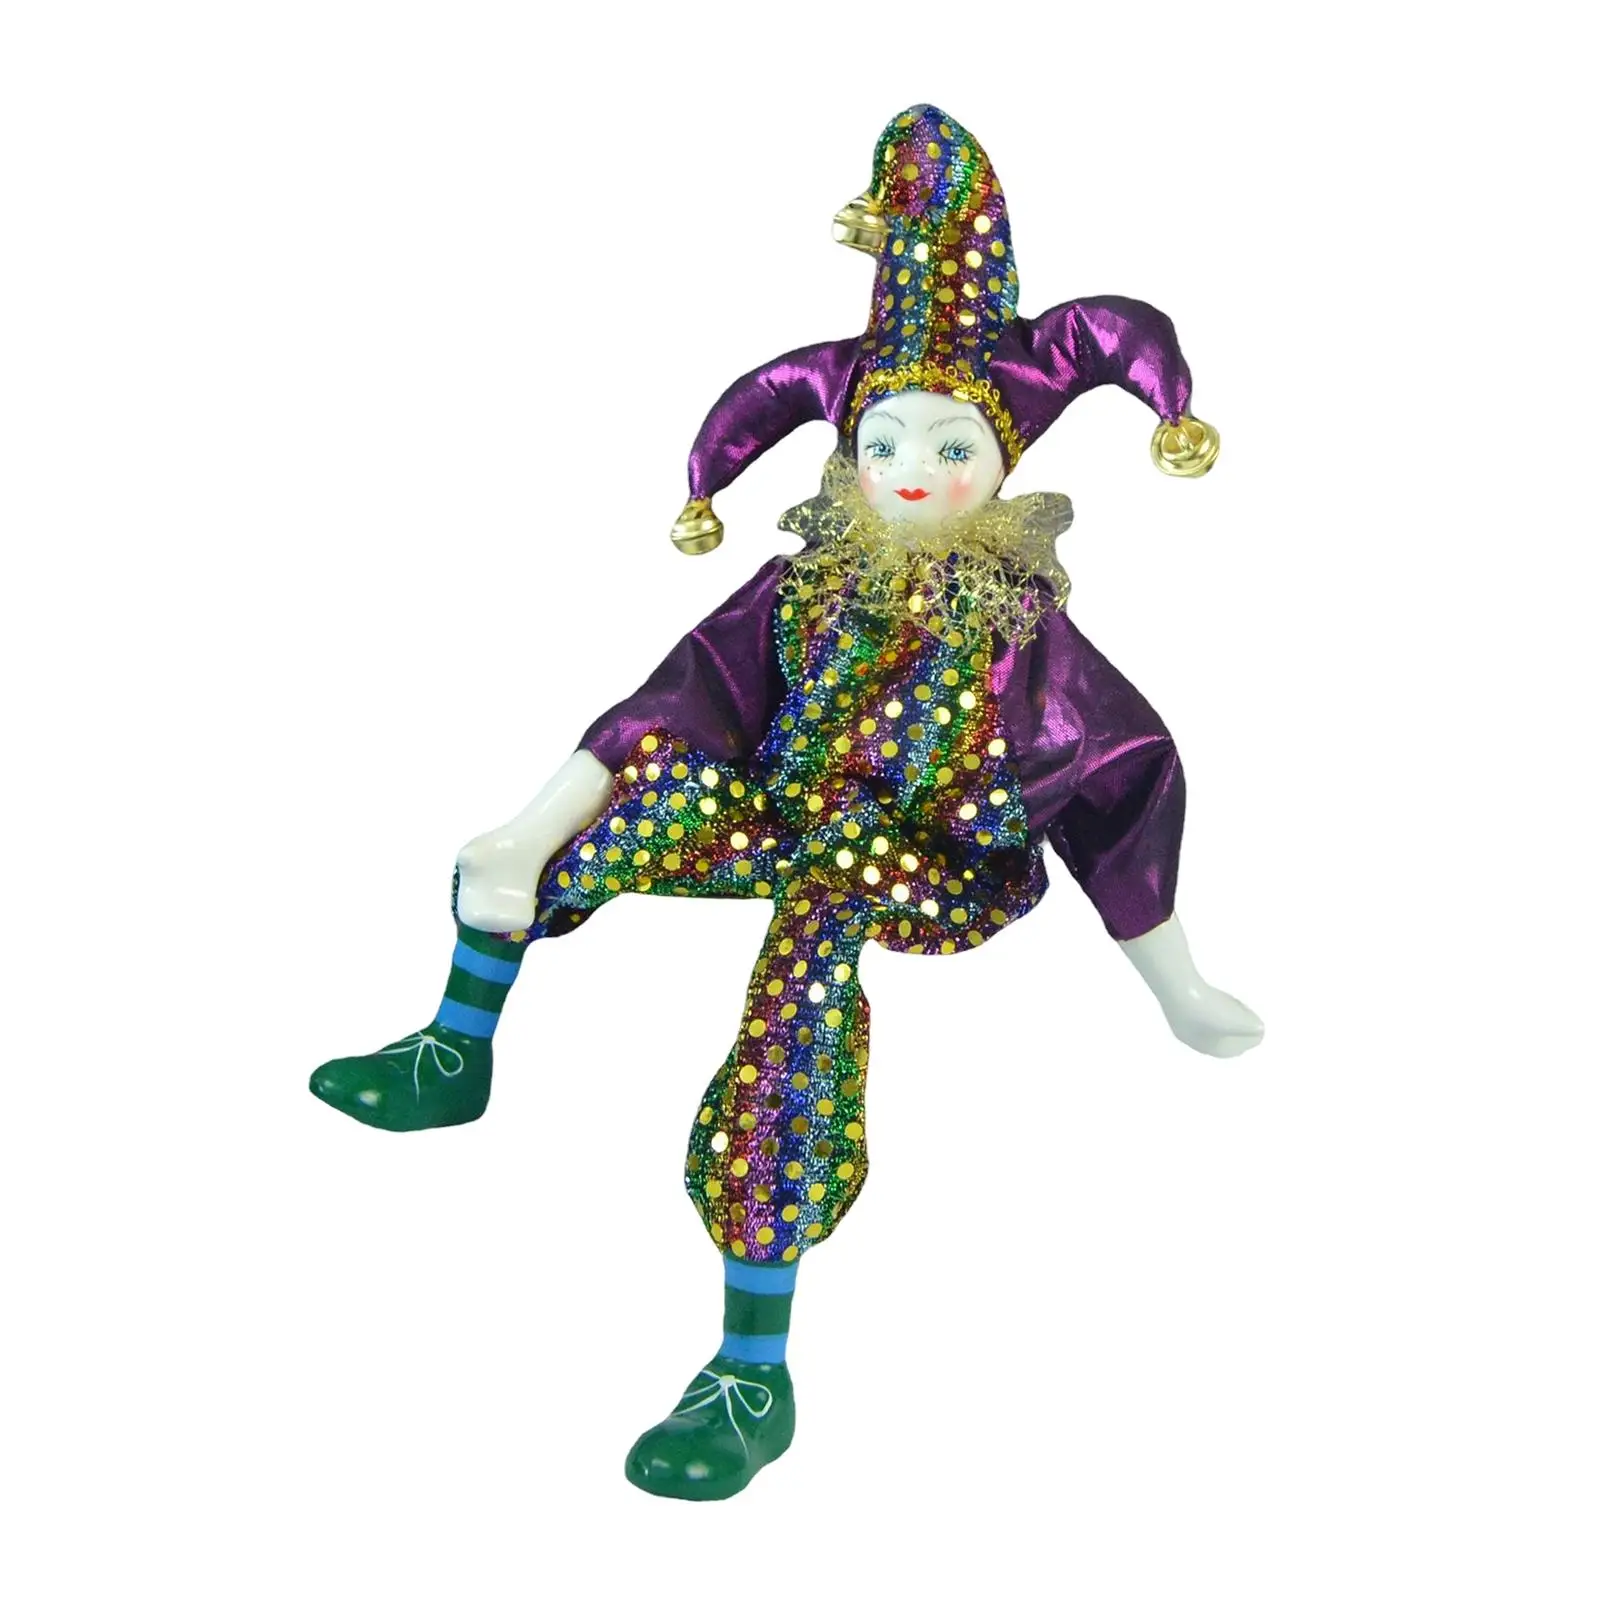 

15inch Clown Stuffed toy Display Halloween Ornaments Porcelain Clown Dolls for Gift Festival Arts collection Souvenirs